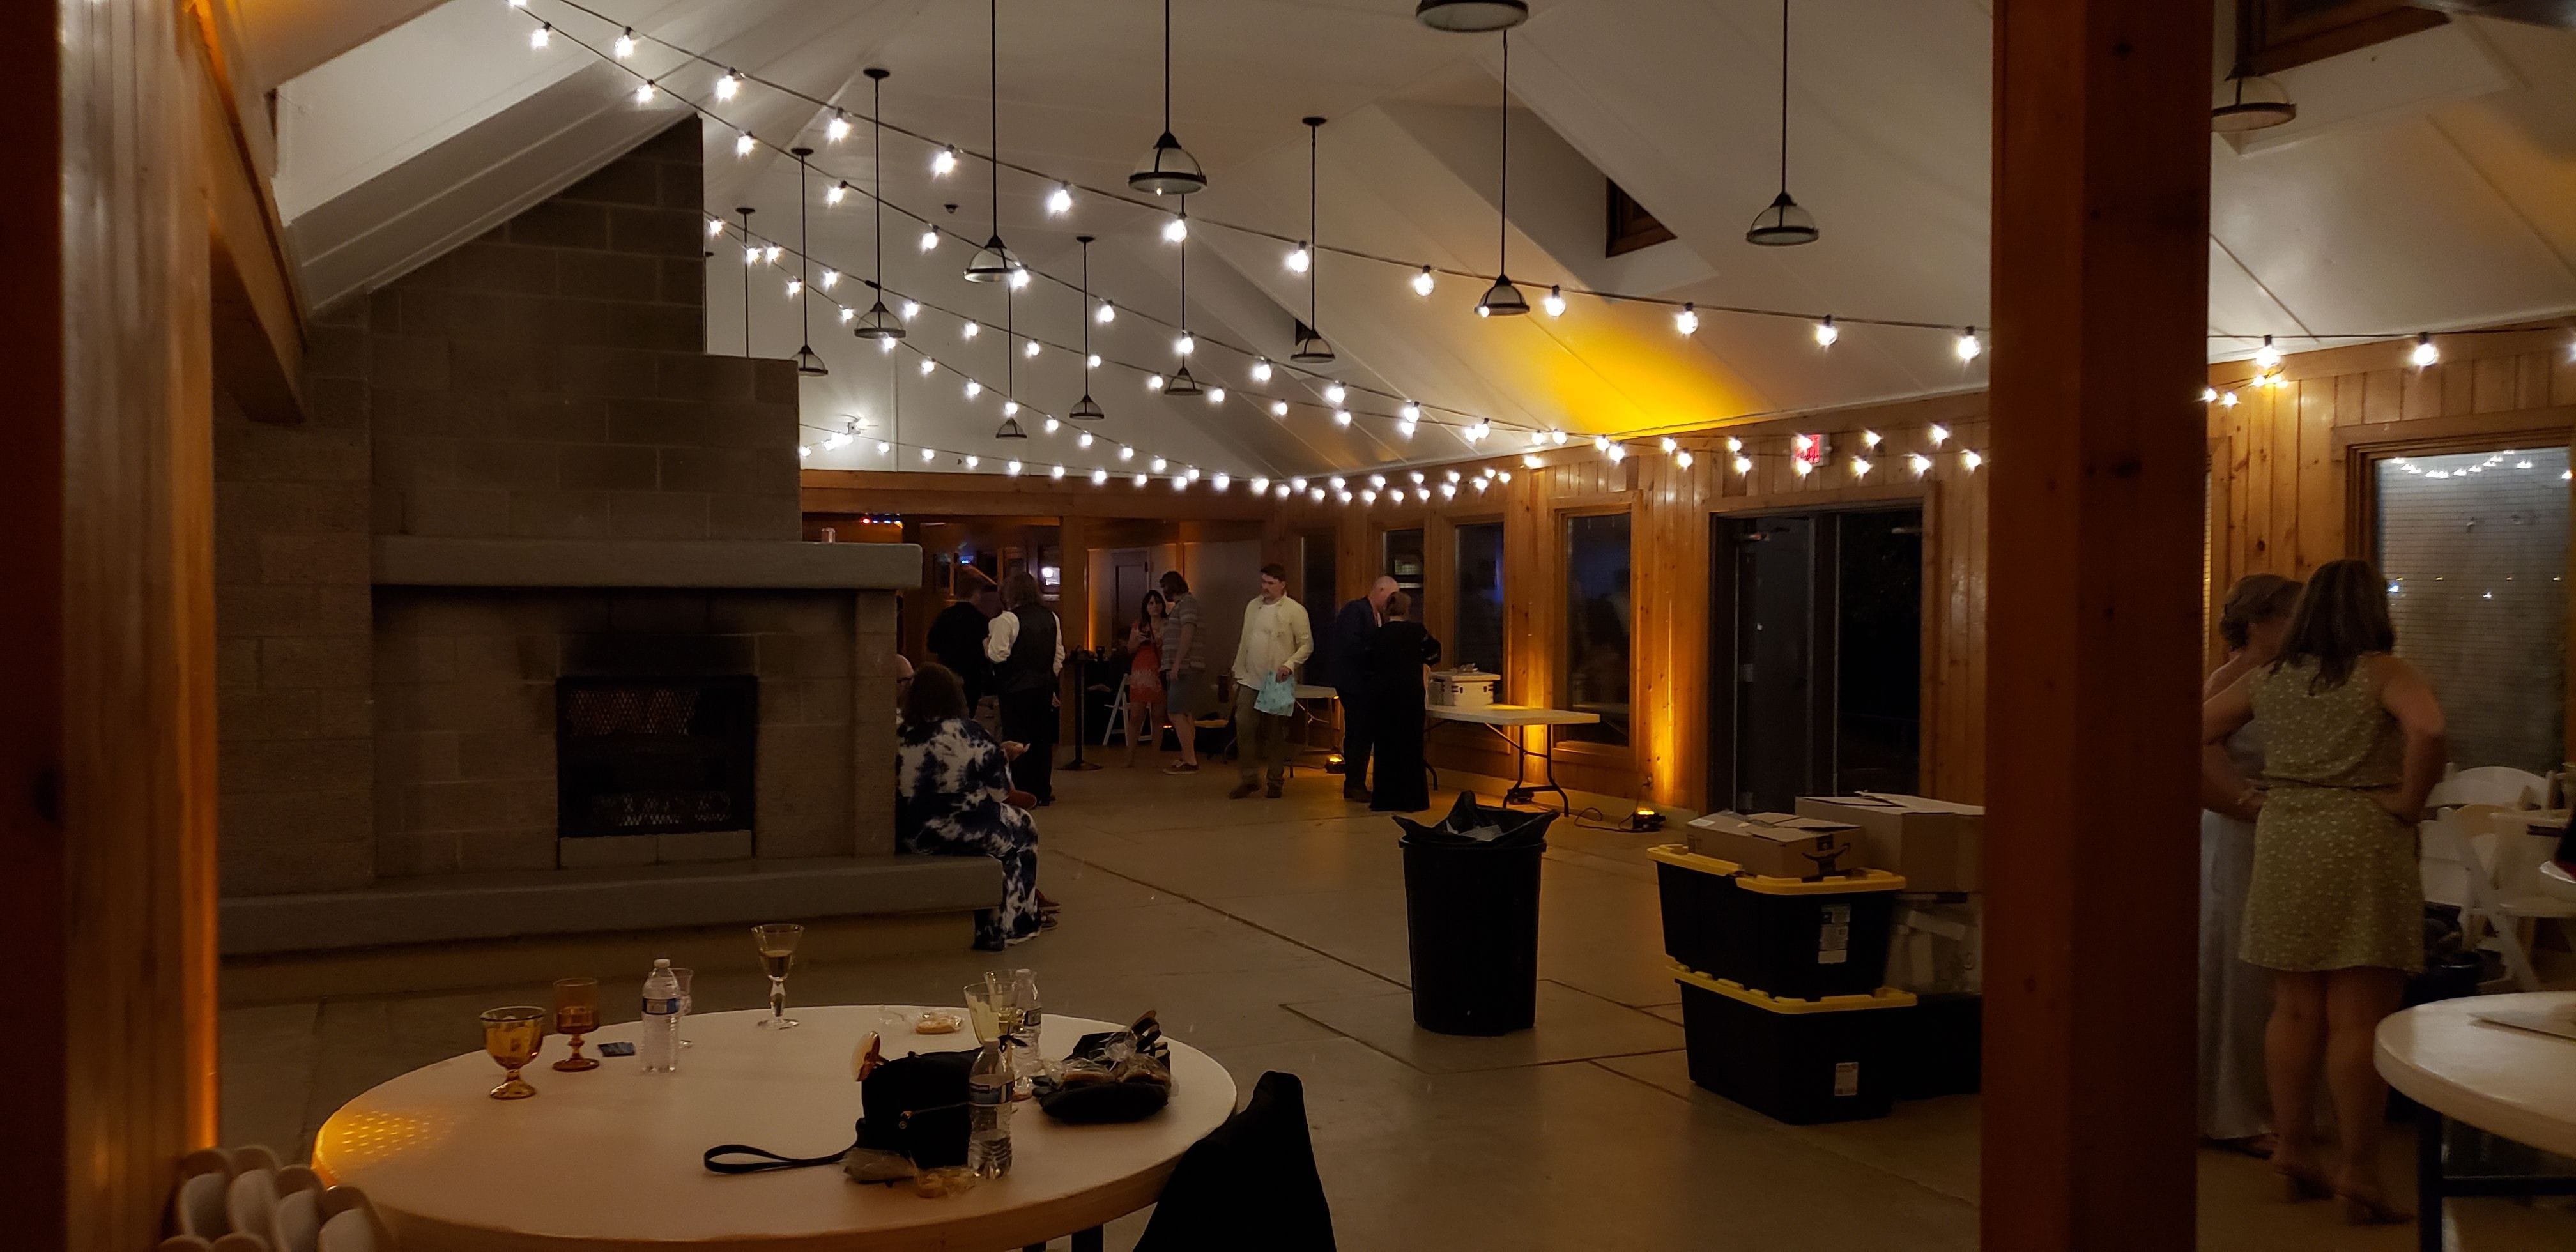 Park Point Beach House wedding lighting with bistro and amber up lighting by Duluth Event Lighting.